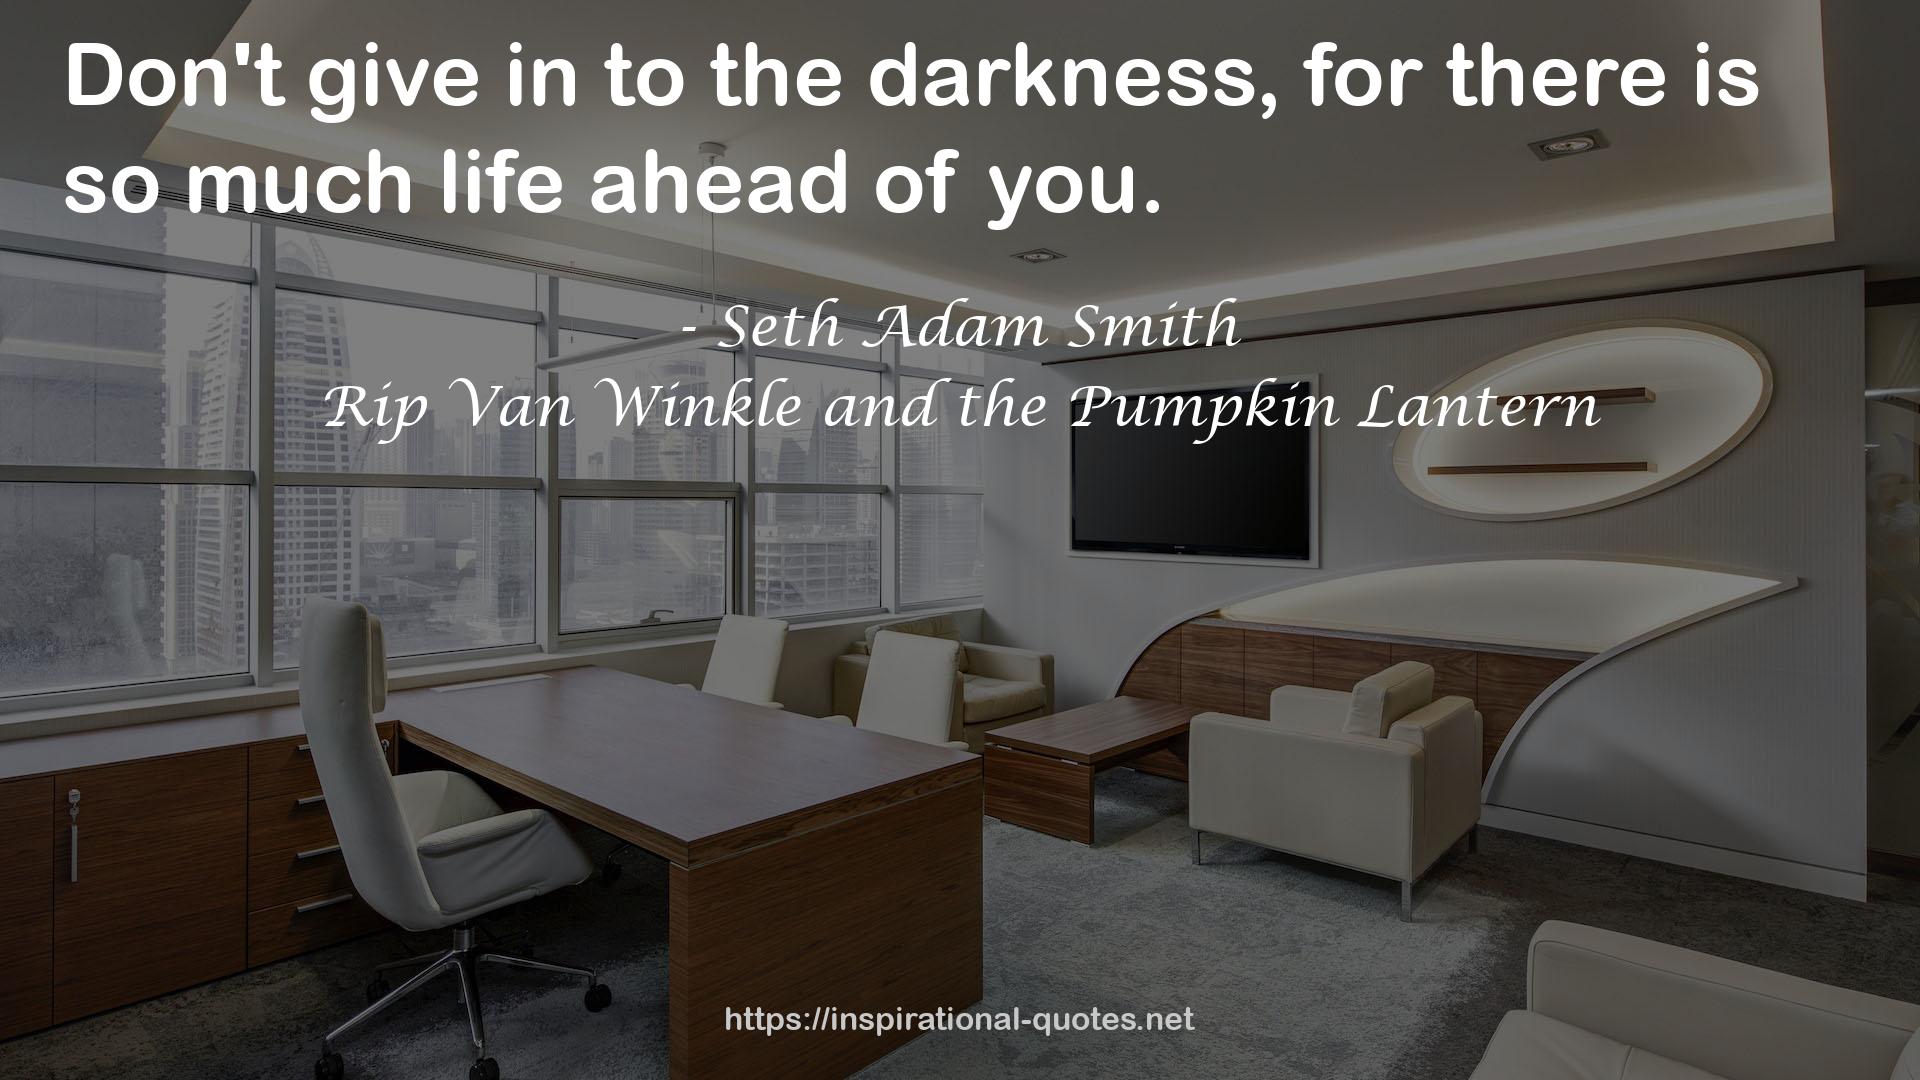 Rip Van Winkle and the Pumpkin Lantern QUOTES